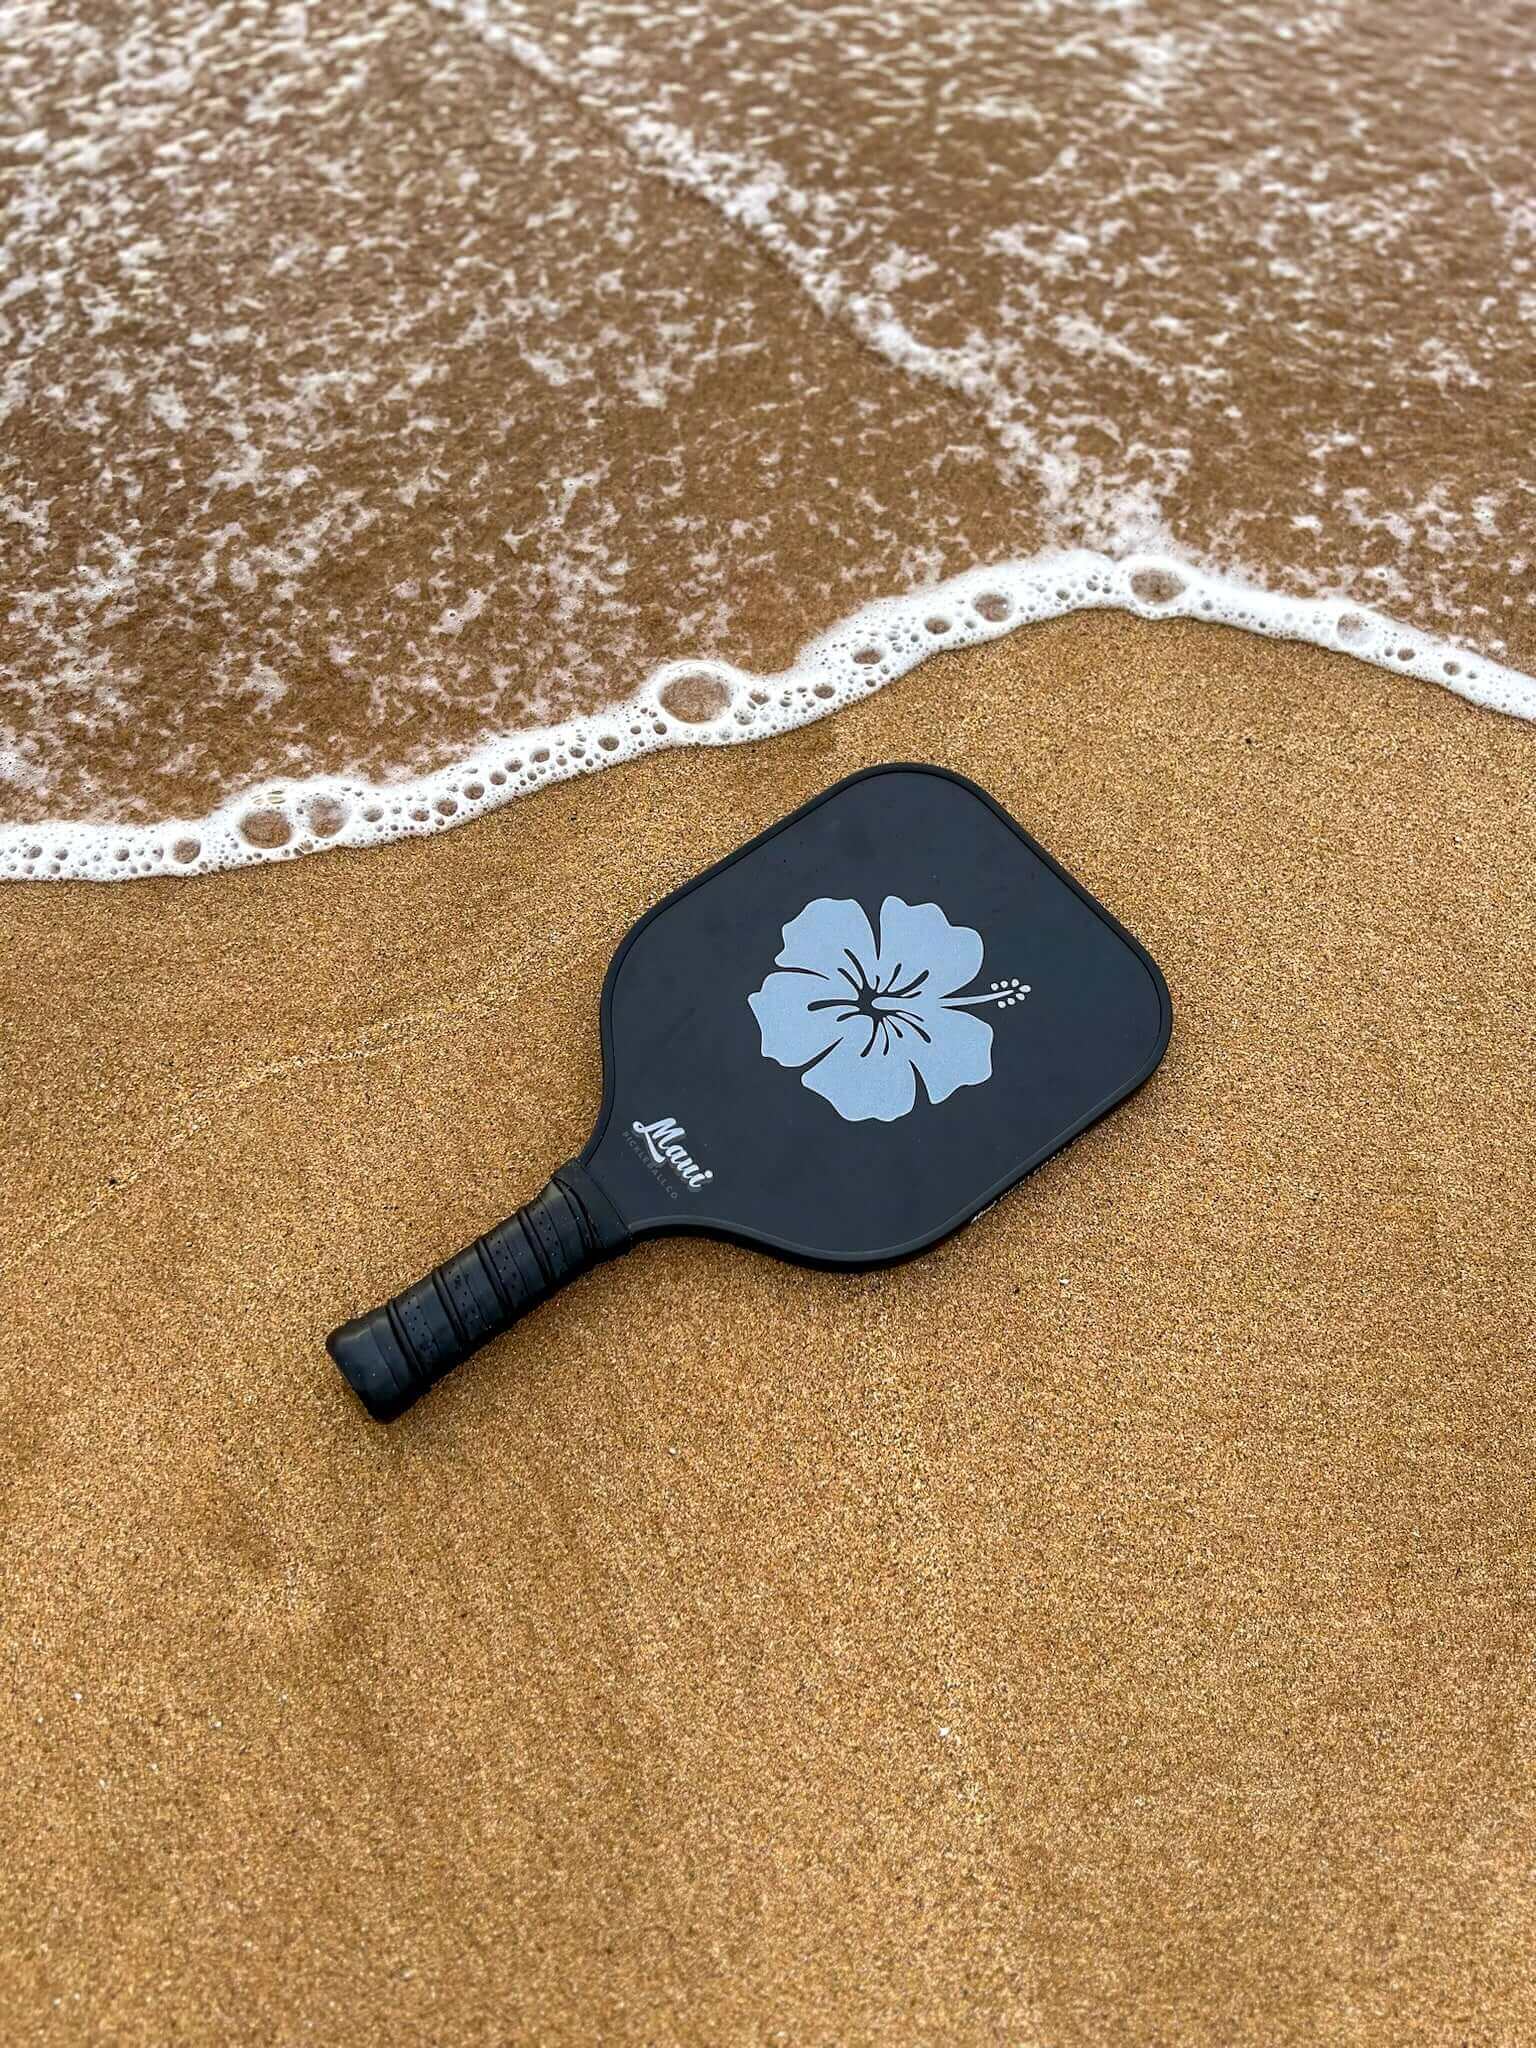 pickleball paddle on the beach with a paddle and pickleball water bottle